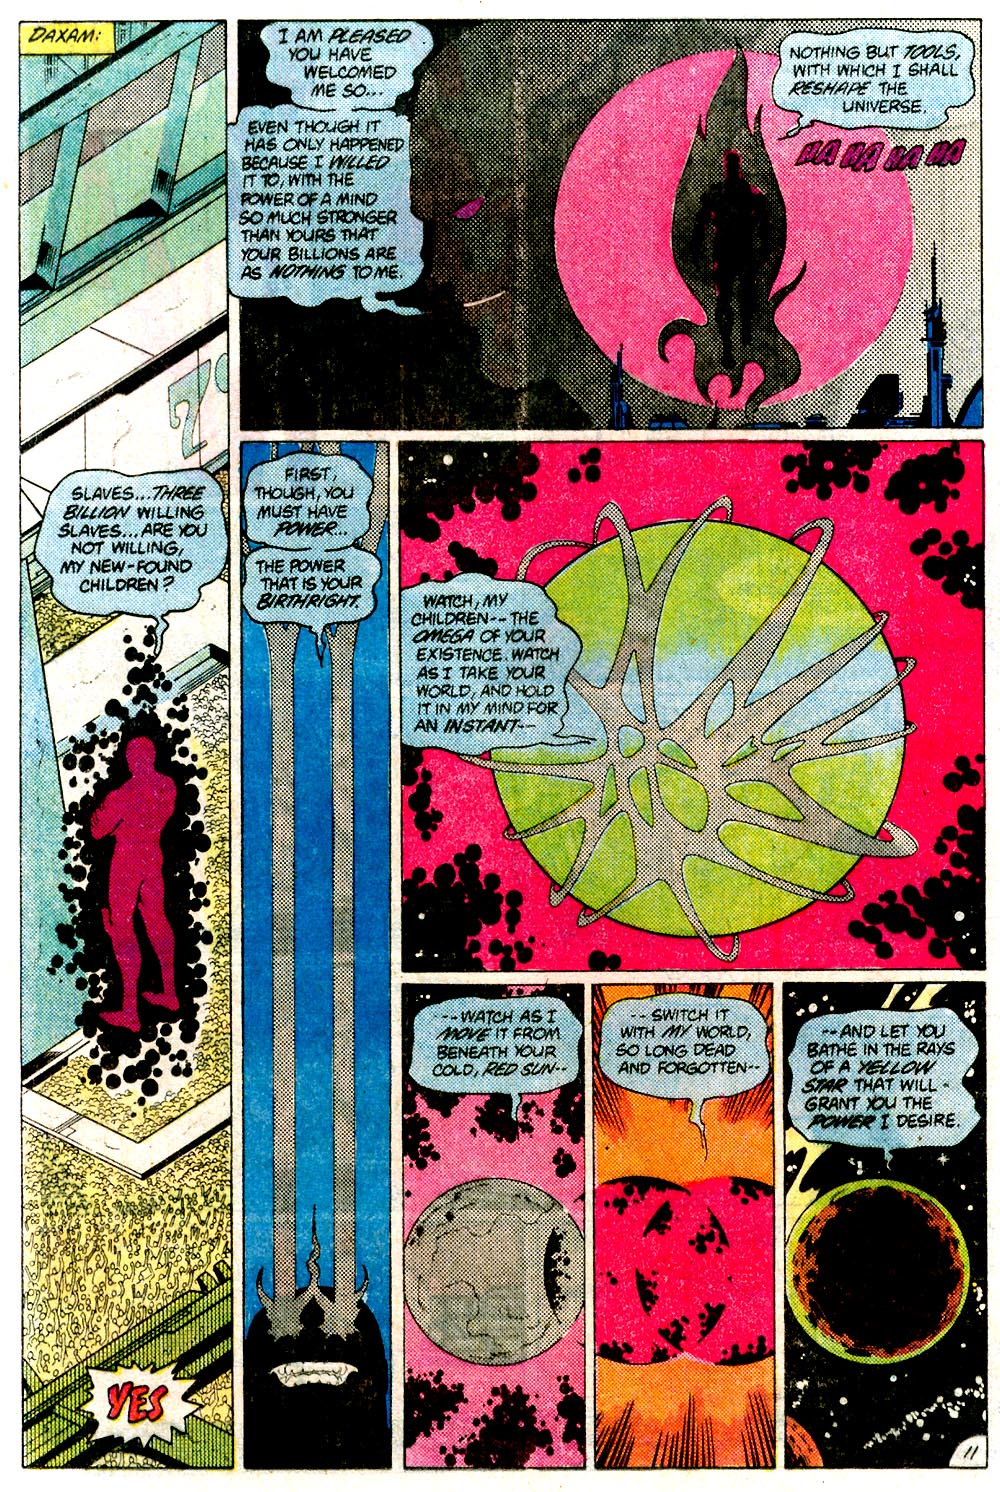 Legion of Super-Heroes (1980) 293 Page 11